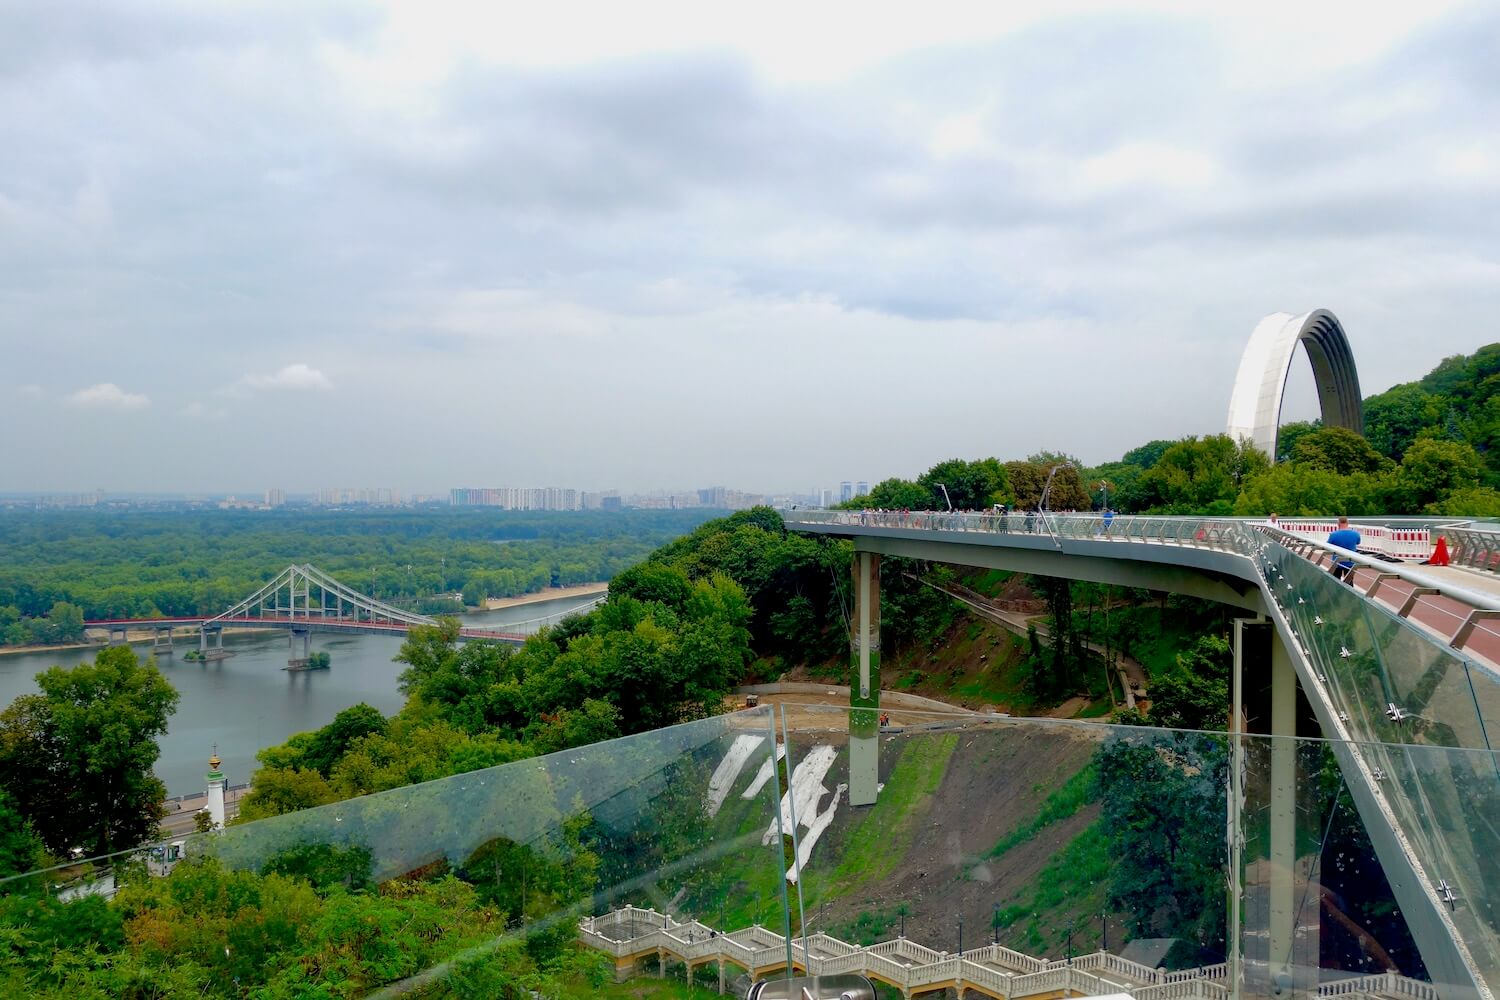 The view from Volodymyr Hill, which includes the new Glass Bridge crossing the ravine to the Friendship Arch.  The view downhill focuses on the Dnieper River. 